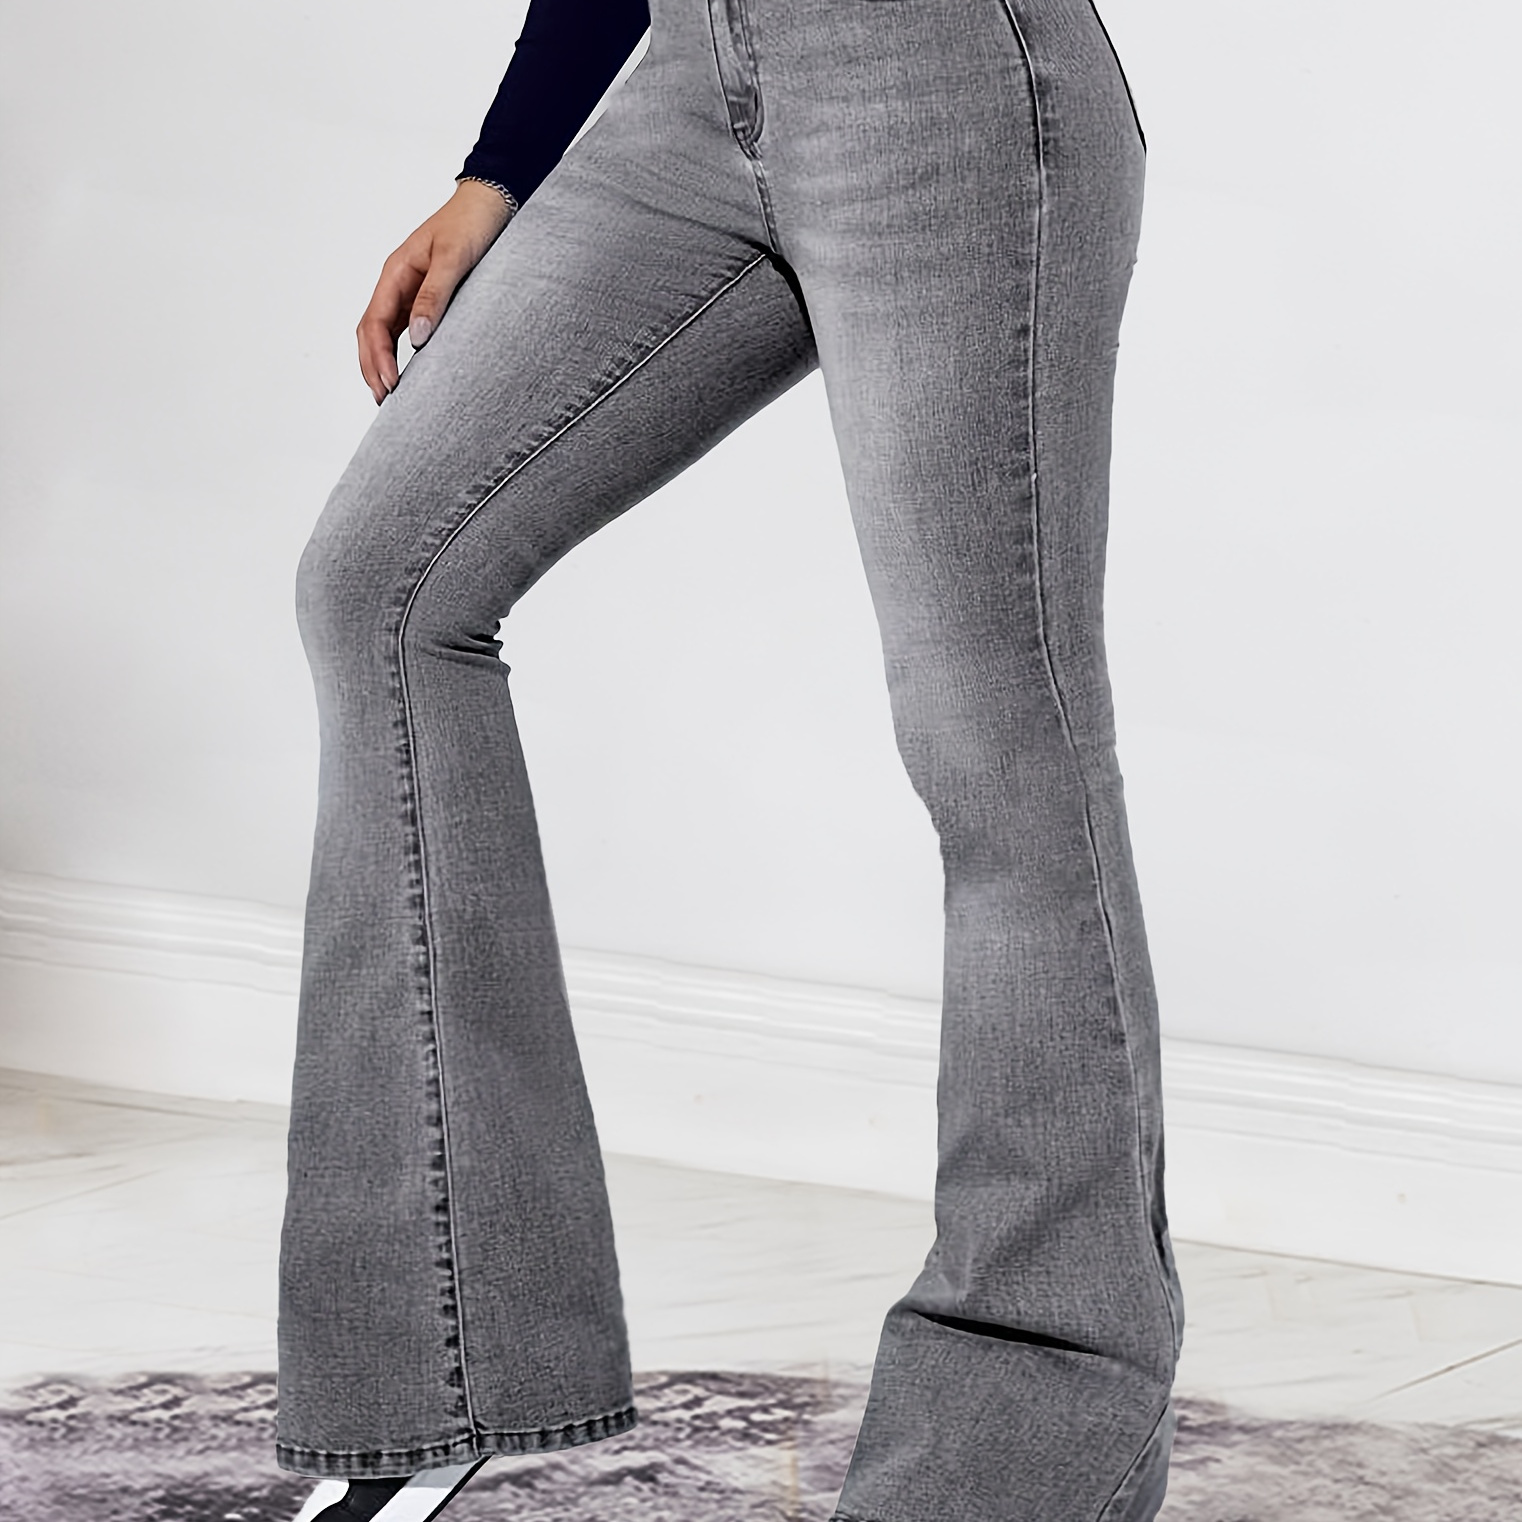 

Women's Elegant Plain Washed Gray Flared Jeans, High-waisted Bell Bottom Trousers, Stretch Denim, Casual Retro Style, Fashionable Pants Suit For Autumn